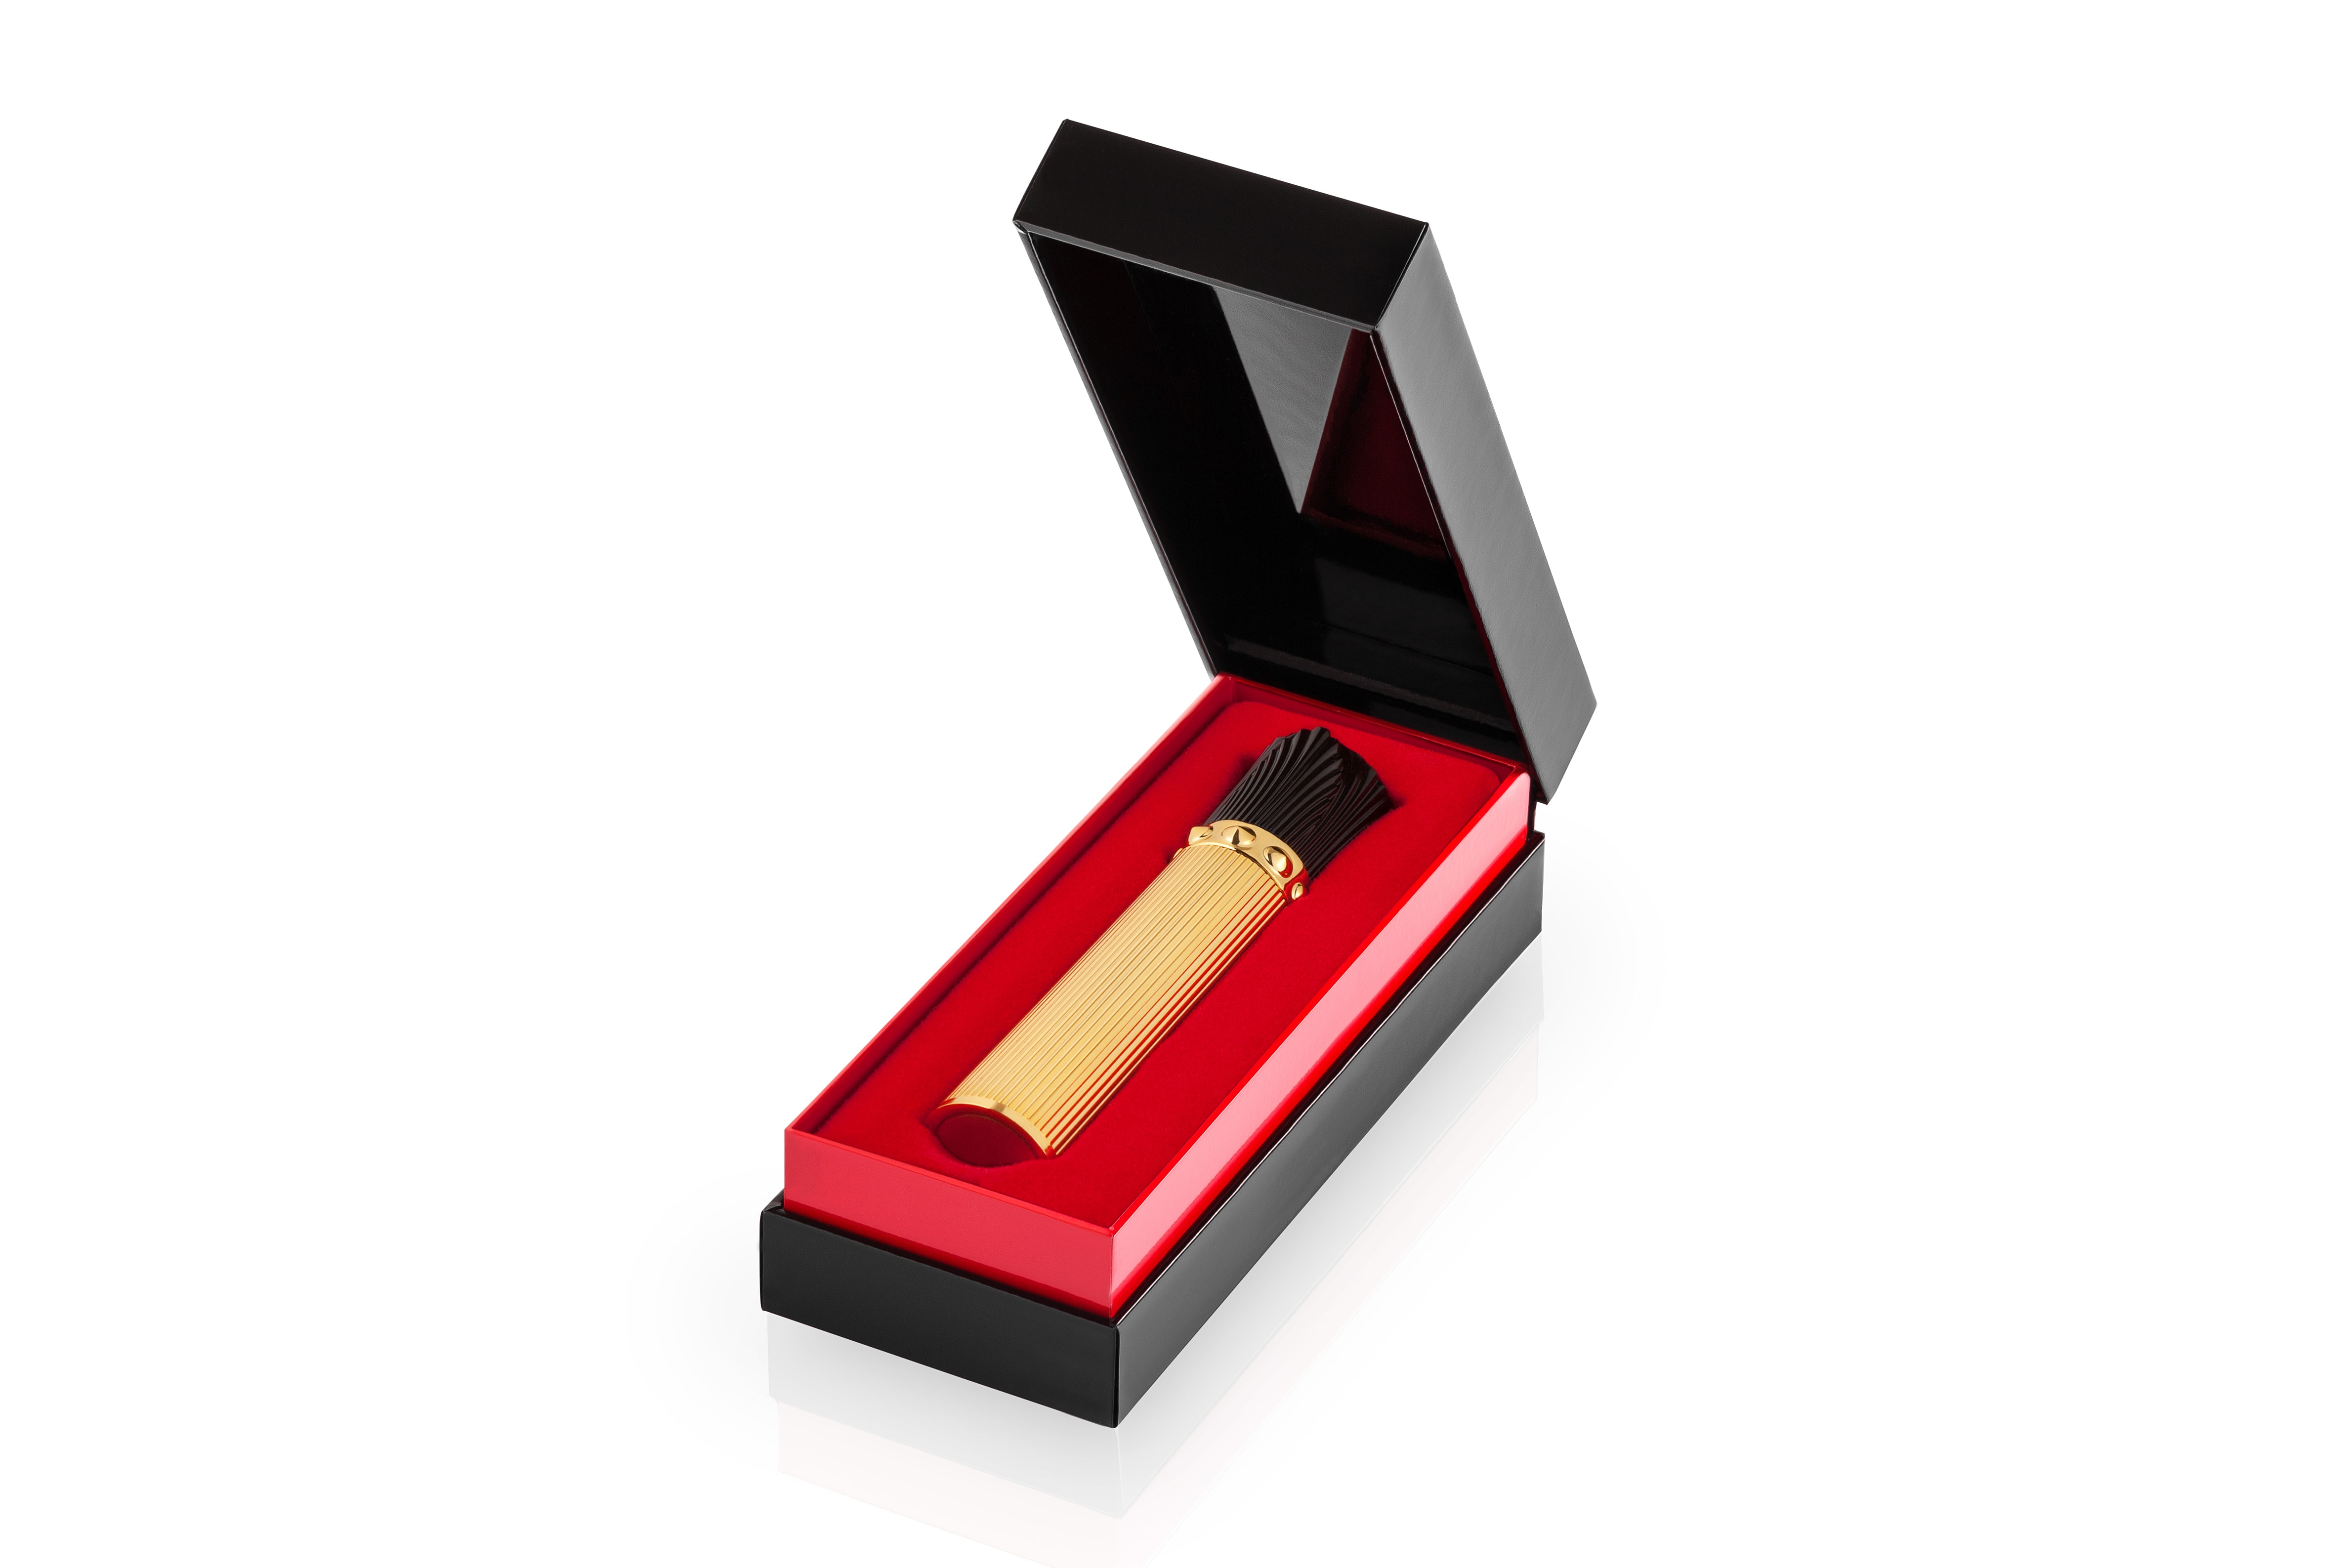 Christian Louboutin Luxury Rouge Makeup Line Mascara Lipstick Beauty Valentine's Day Collection